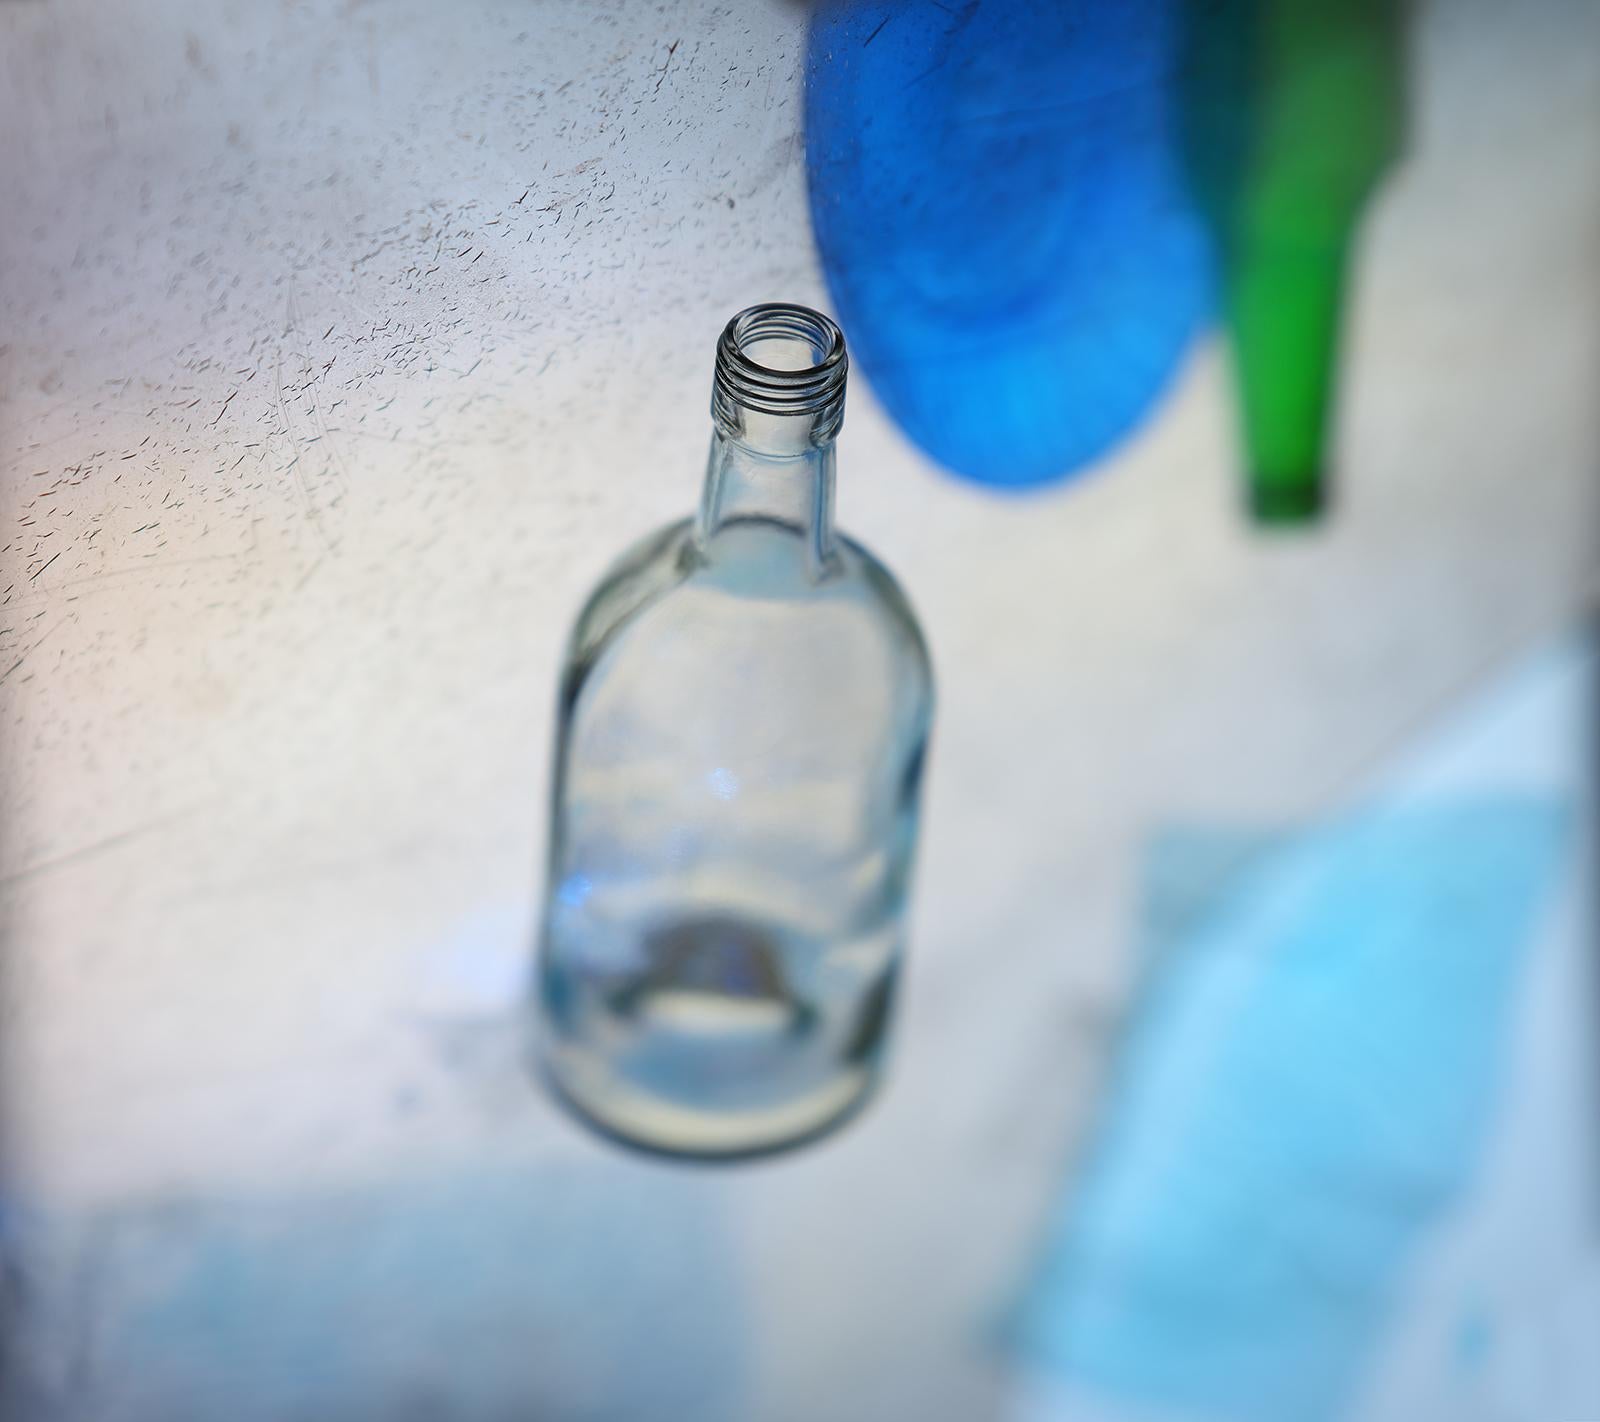 'Waterfront' by Vitalii Ledokollov -  is a powerful blue abstract figurative photography print. Bottles are used to create a subtle effect of figures. The artist brings life to ordinary subjects and reflects on relationships in the material world